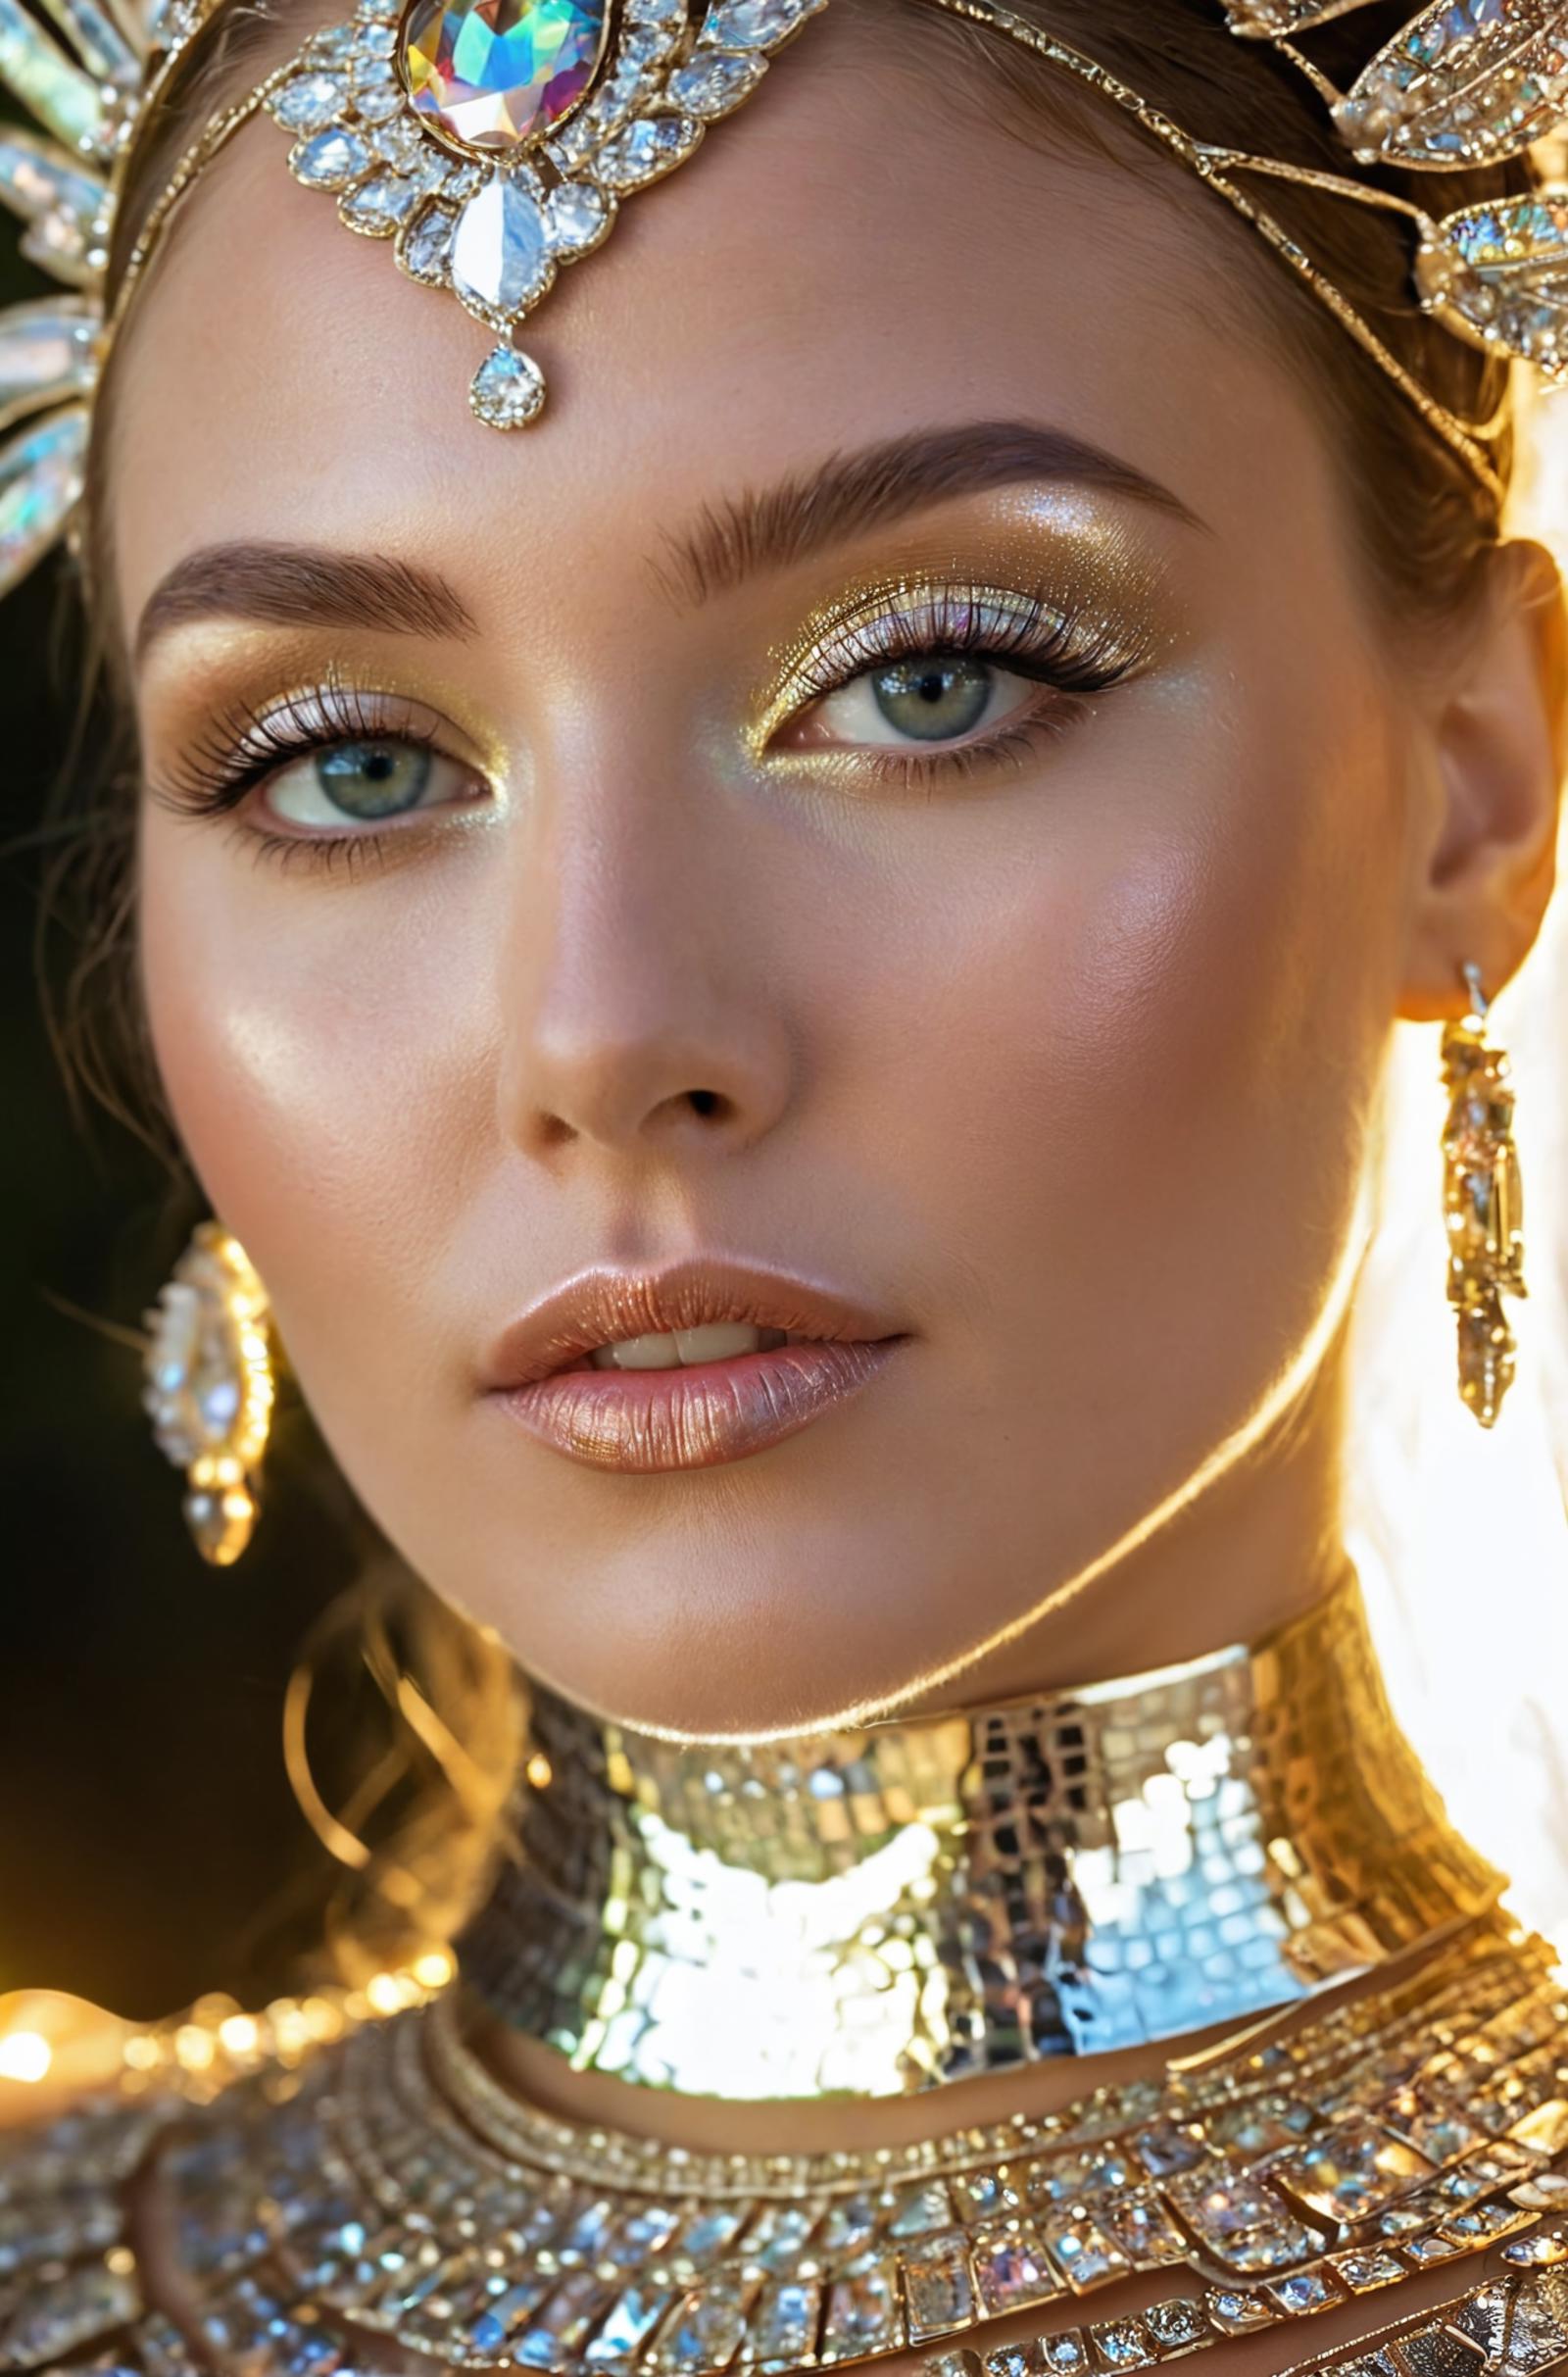 A woman with blue eyes and gold accents on her face, wearing a gold necklace with a pearl headband.